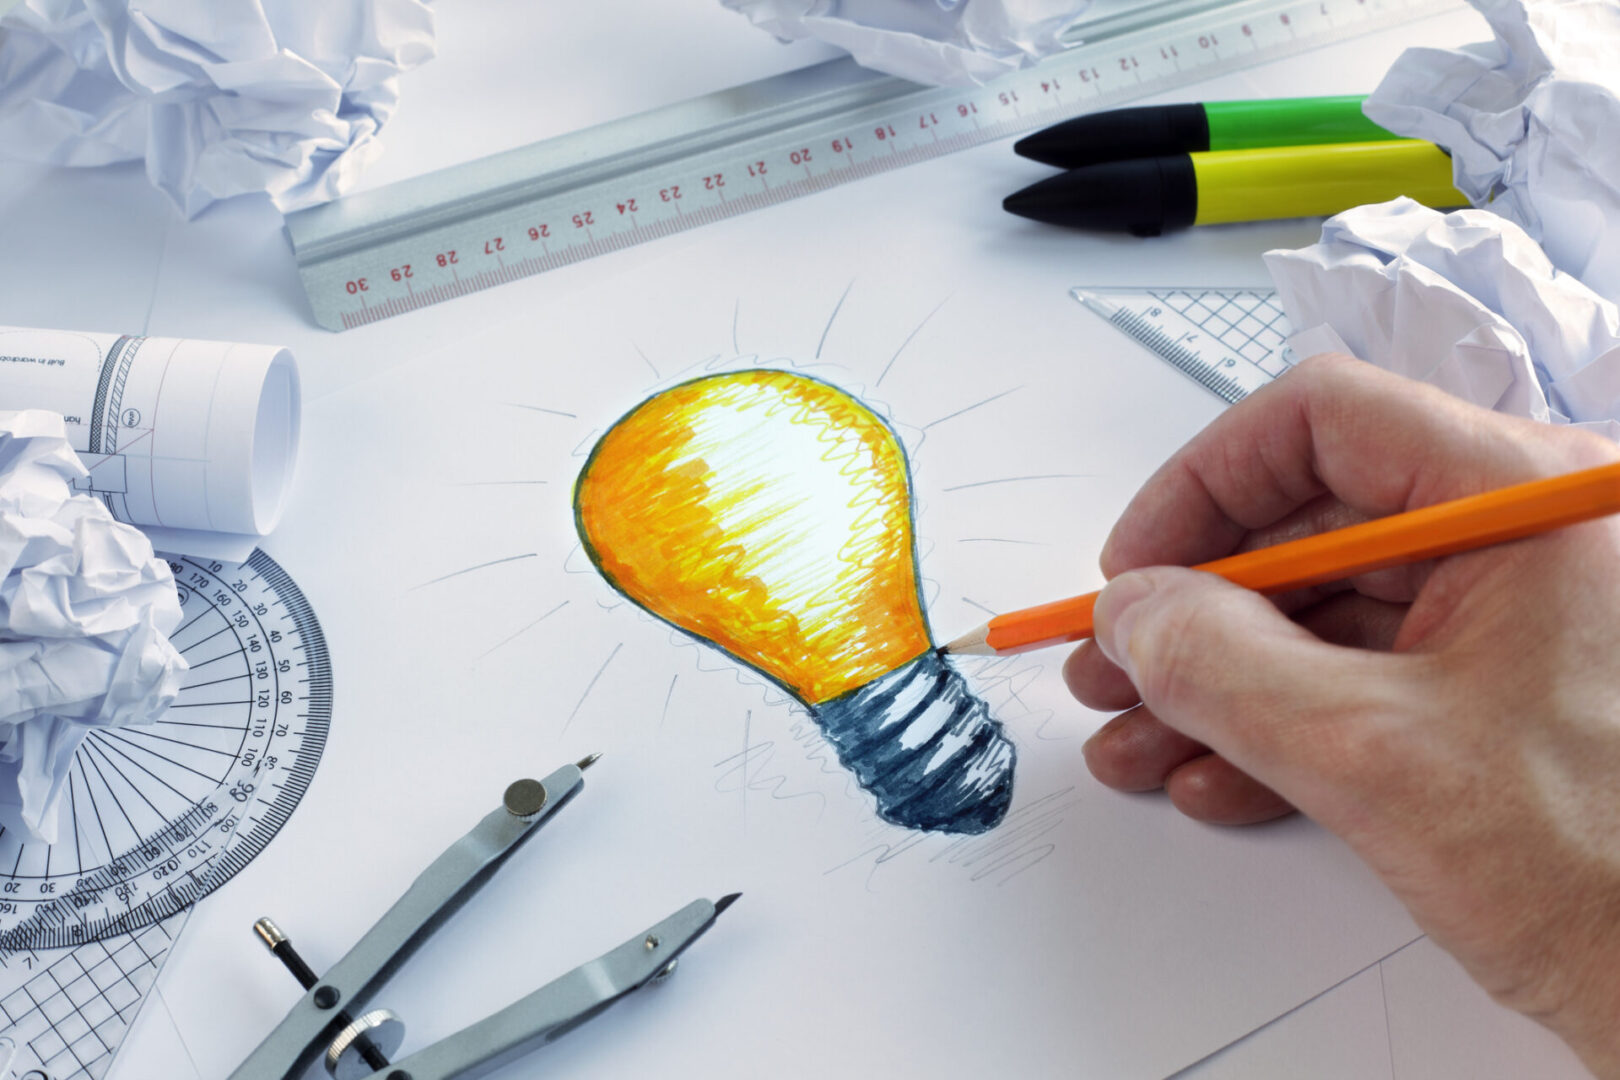 A person drawing an image of a light bulb.